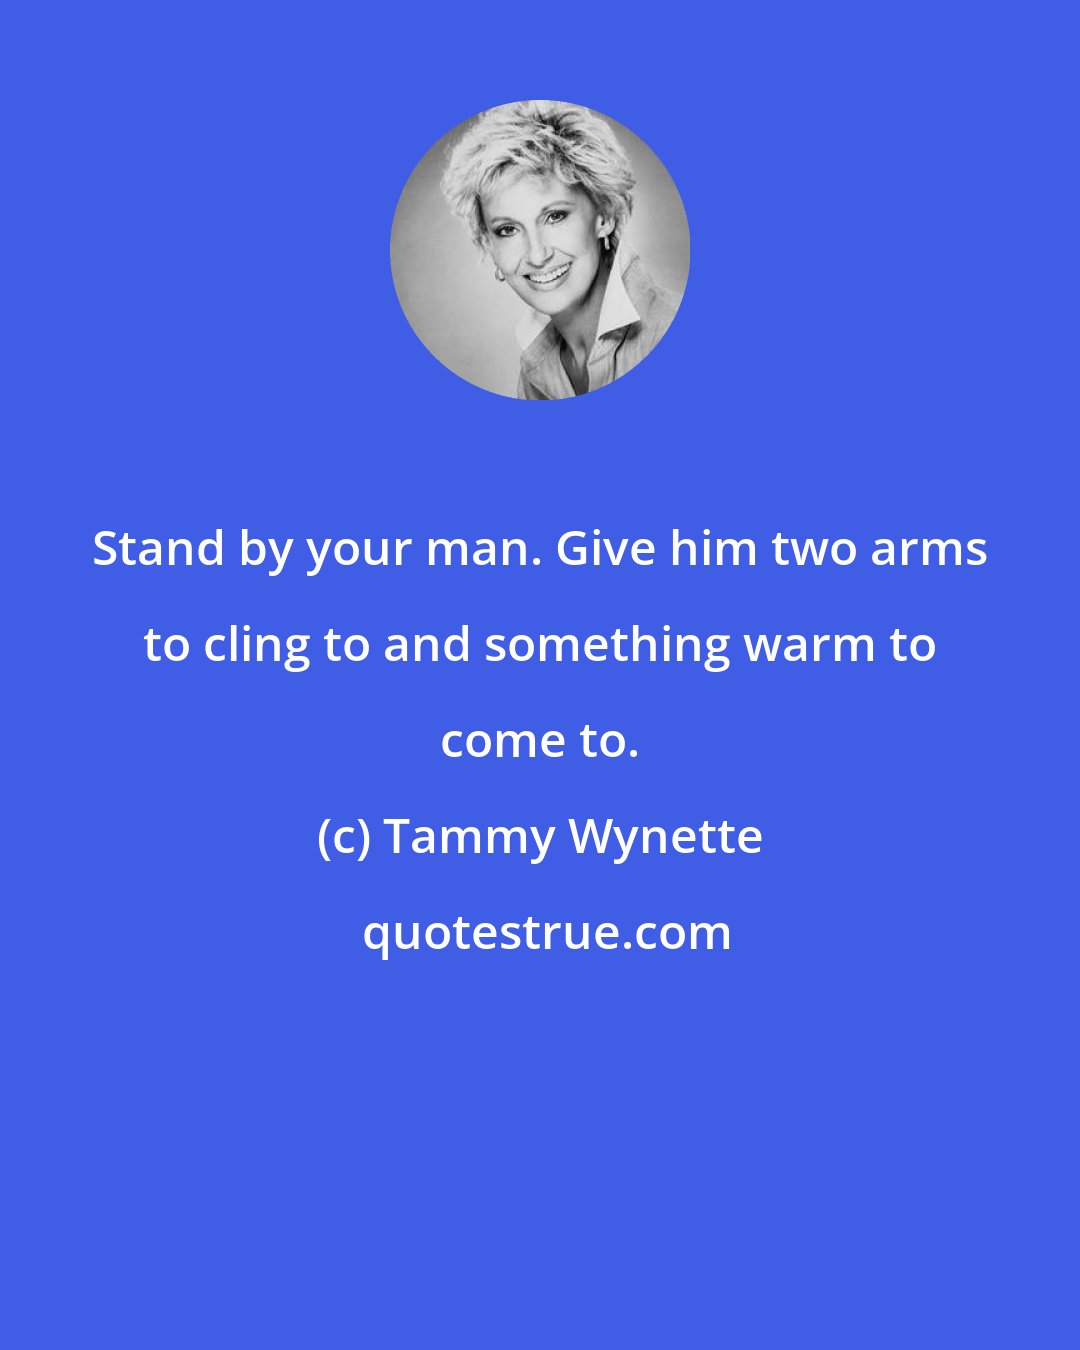 Tammy Wynette: Stand by your man. Give him two arms to cling to and something warm to come to.